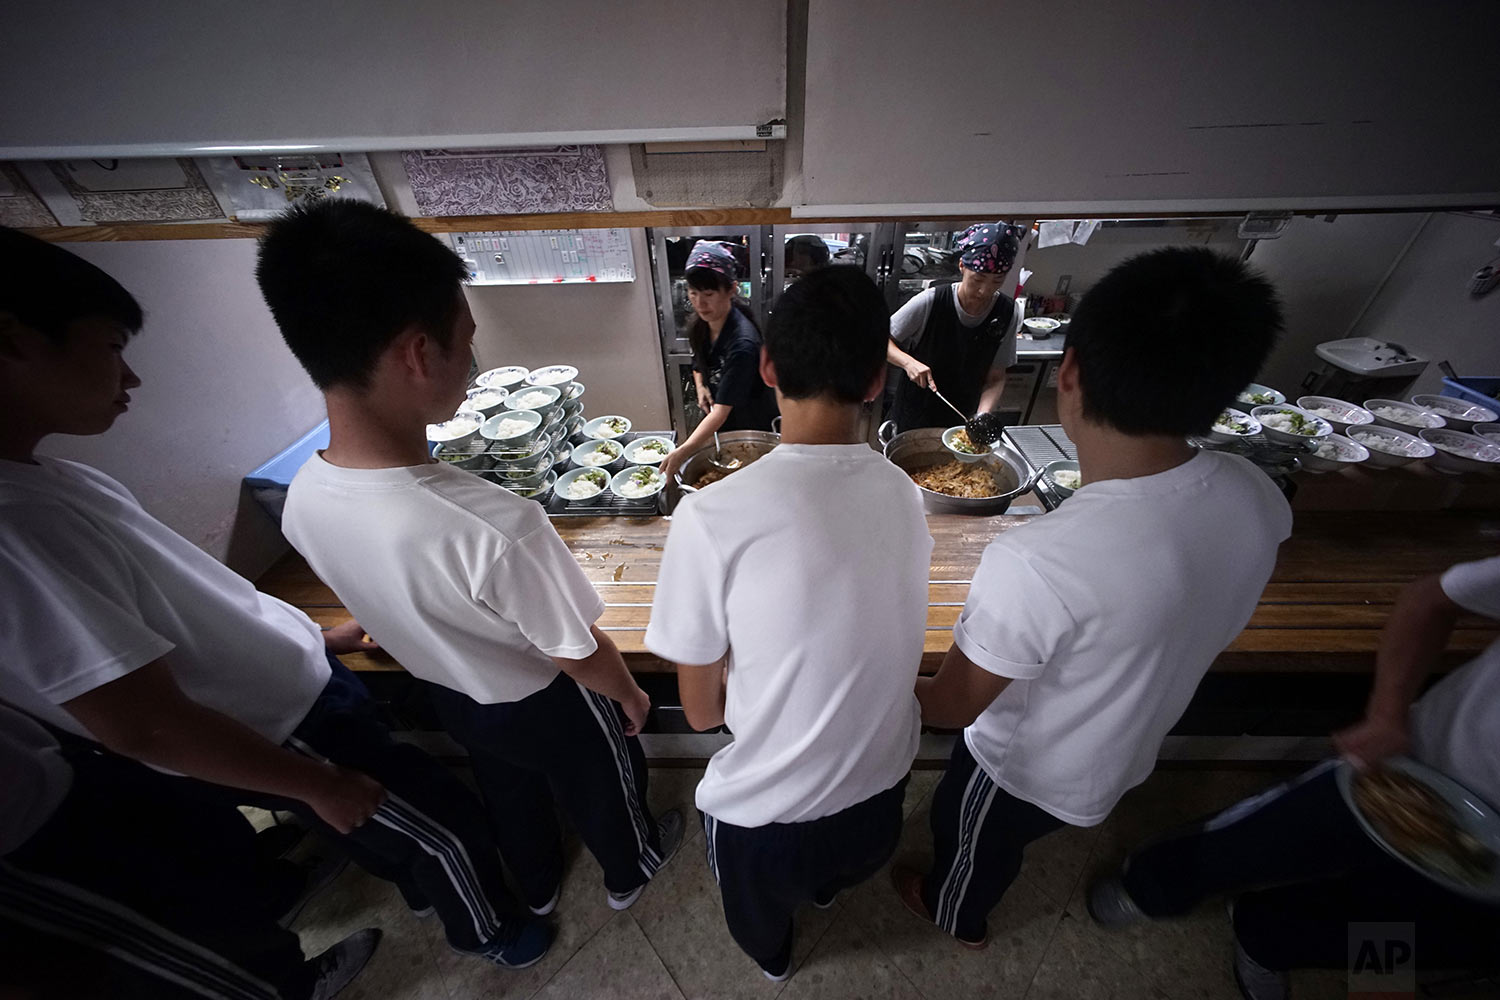  In this Sept. 26, 2017, photo, students line up for lunch at a dining hall in a Korean high school in Tokyo. (AP Photo/Eugene Hoshiko) 